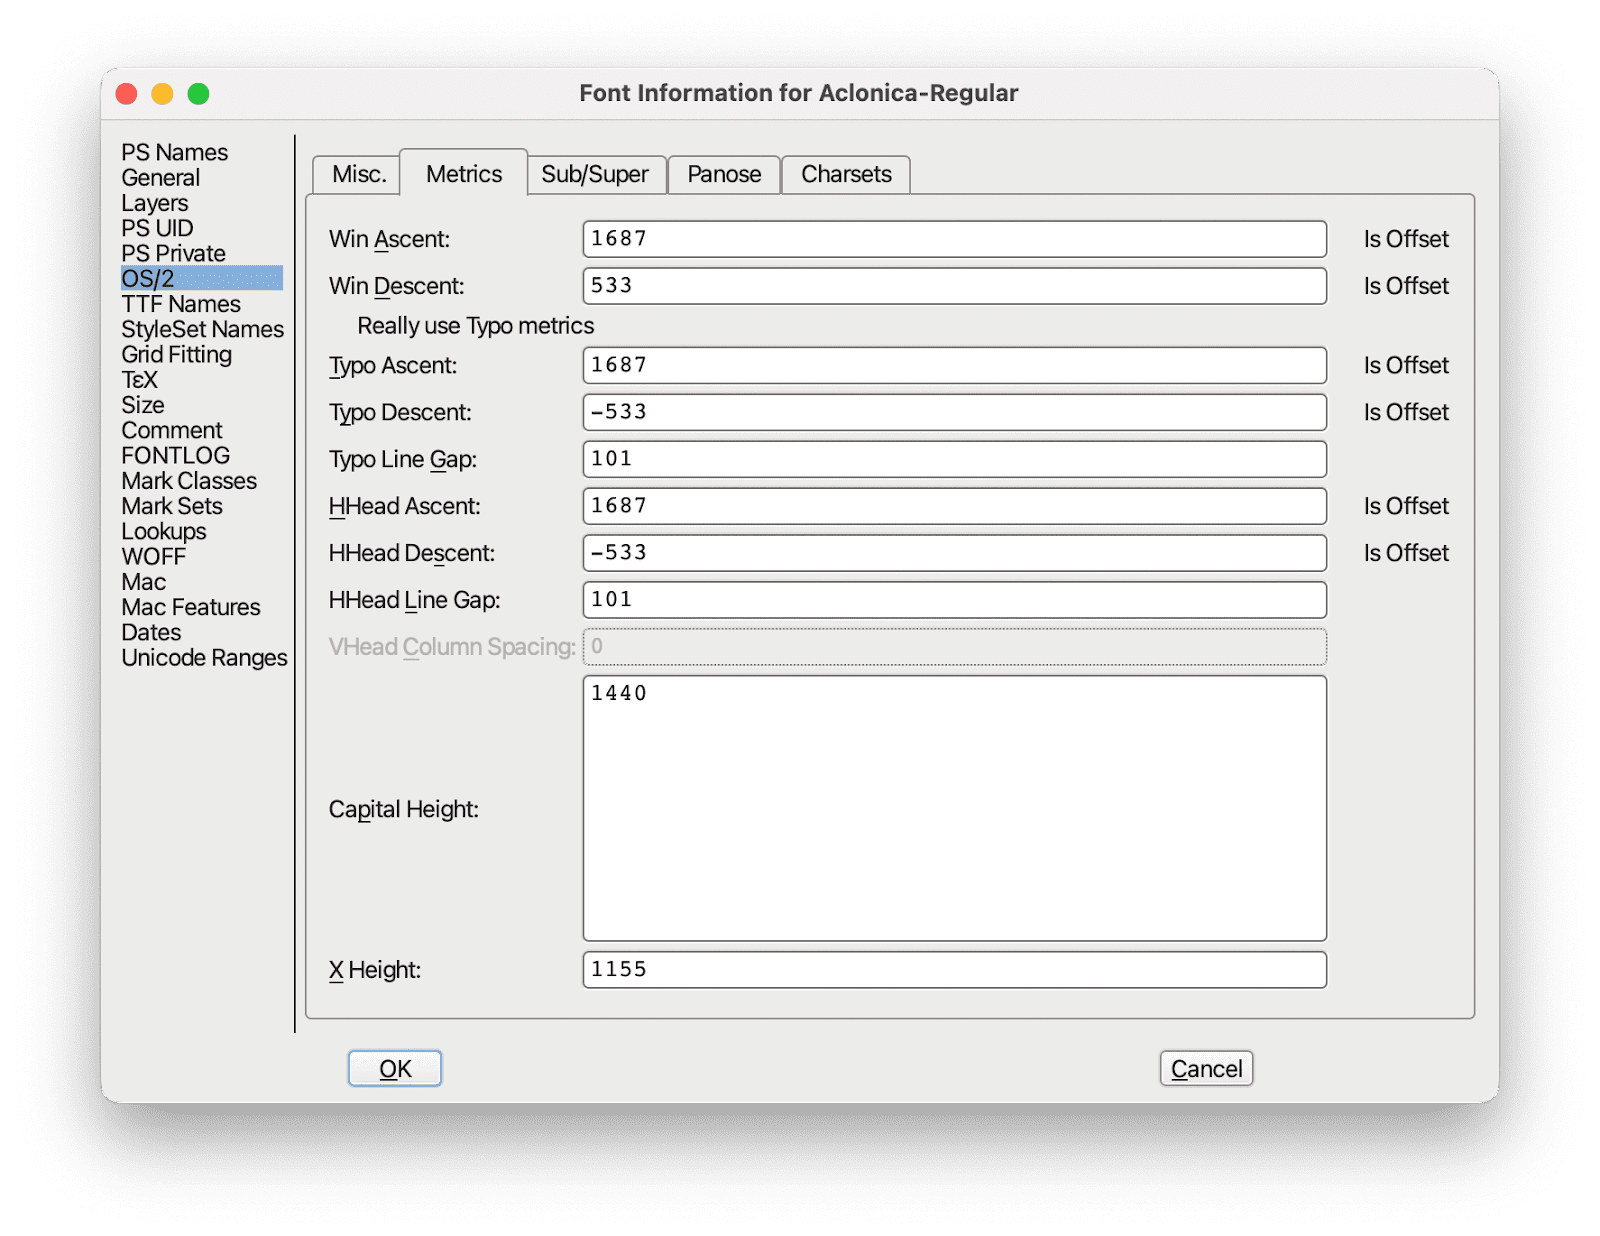 Screenshot of the Font Information dialog box in FontForge. The dialog box displays font metrics like 'Typo Ascent', 'Typo Descent', and 'Typo Line Gap'.